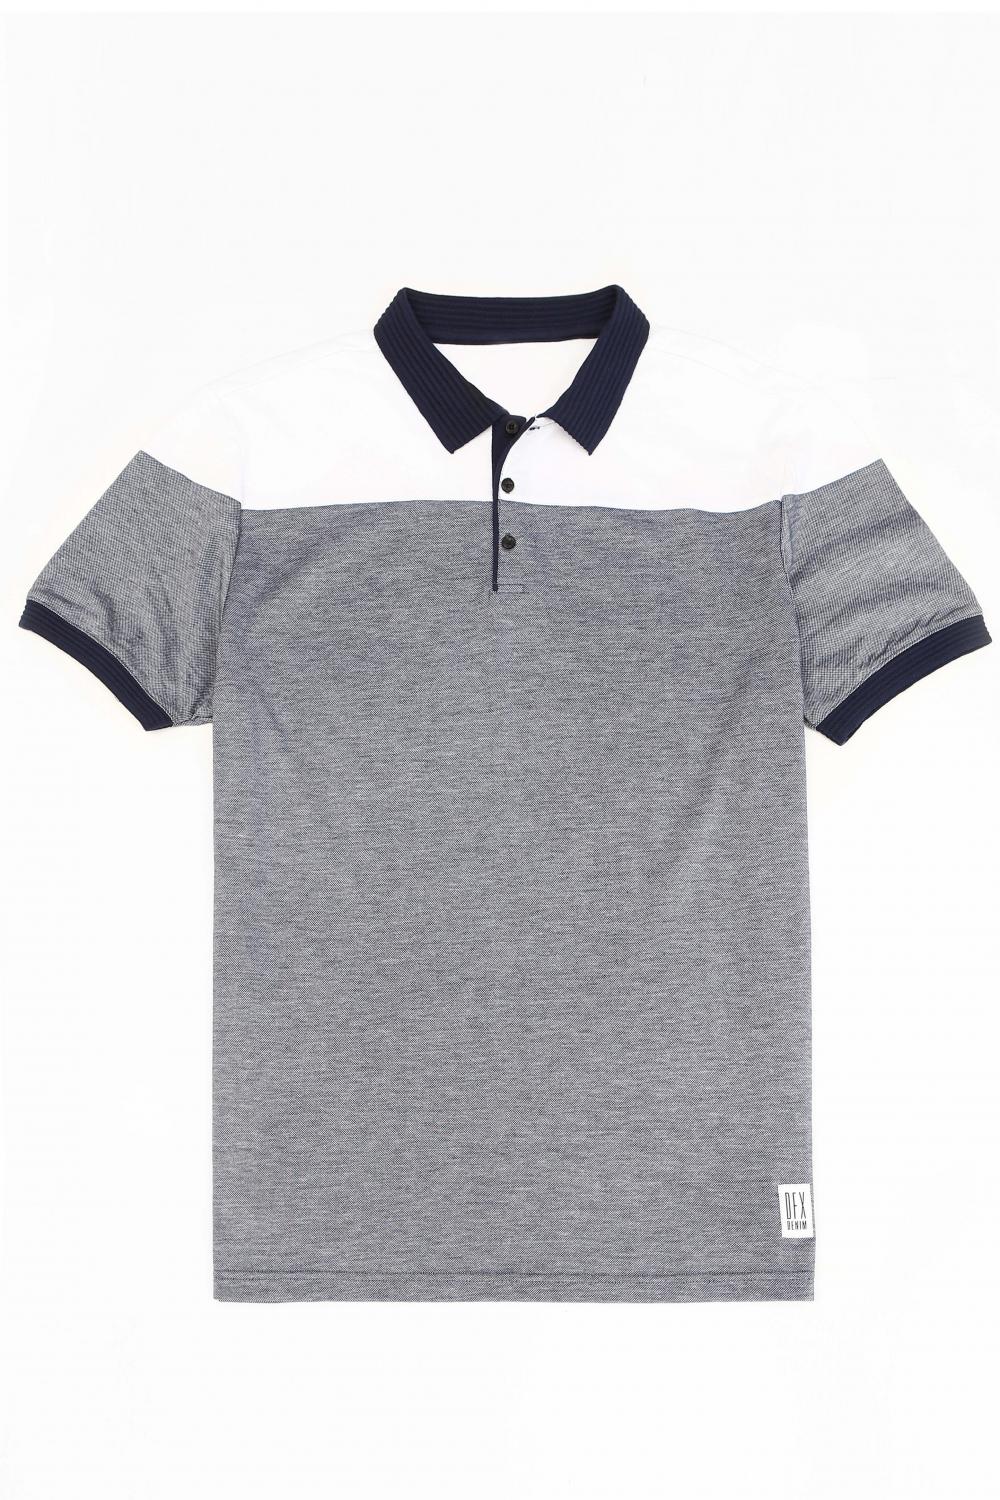 MEN'S KNIT STYLED POLO